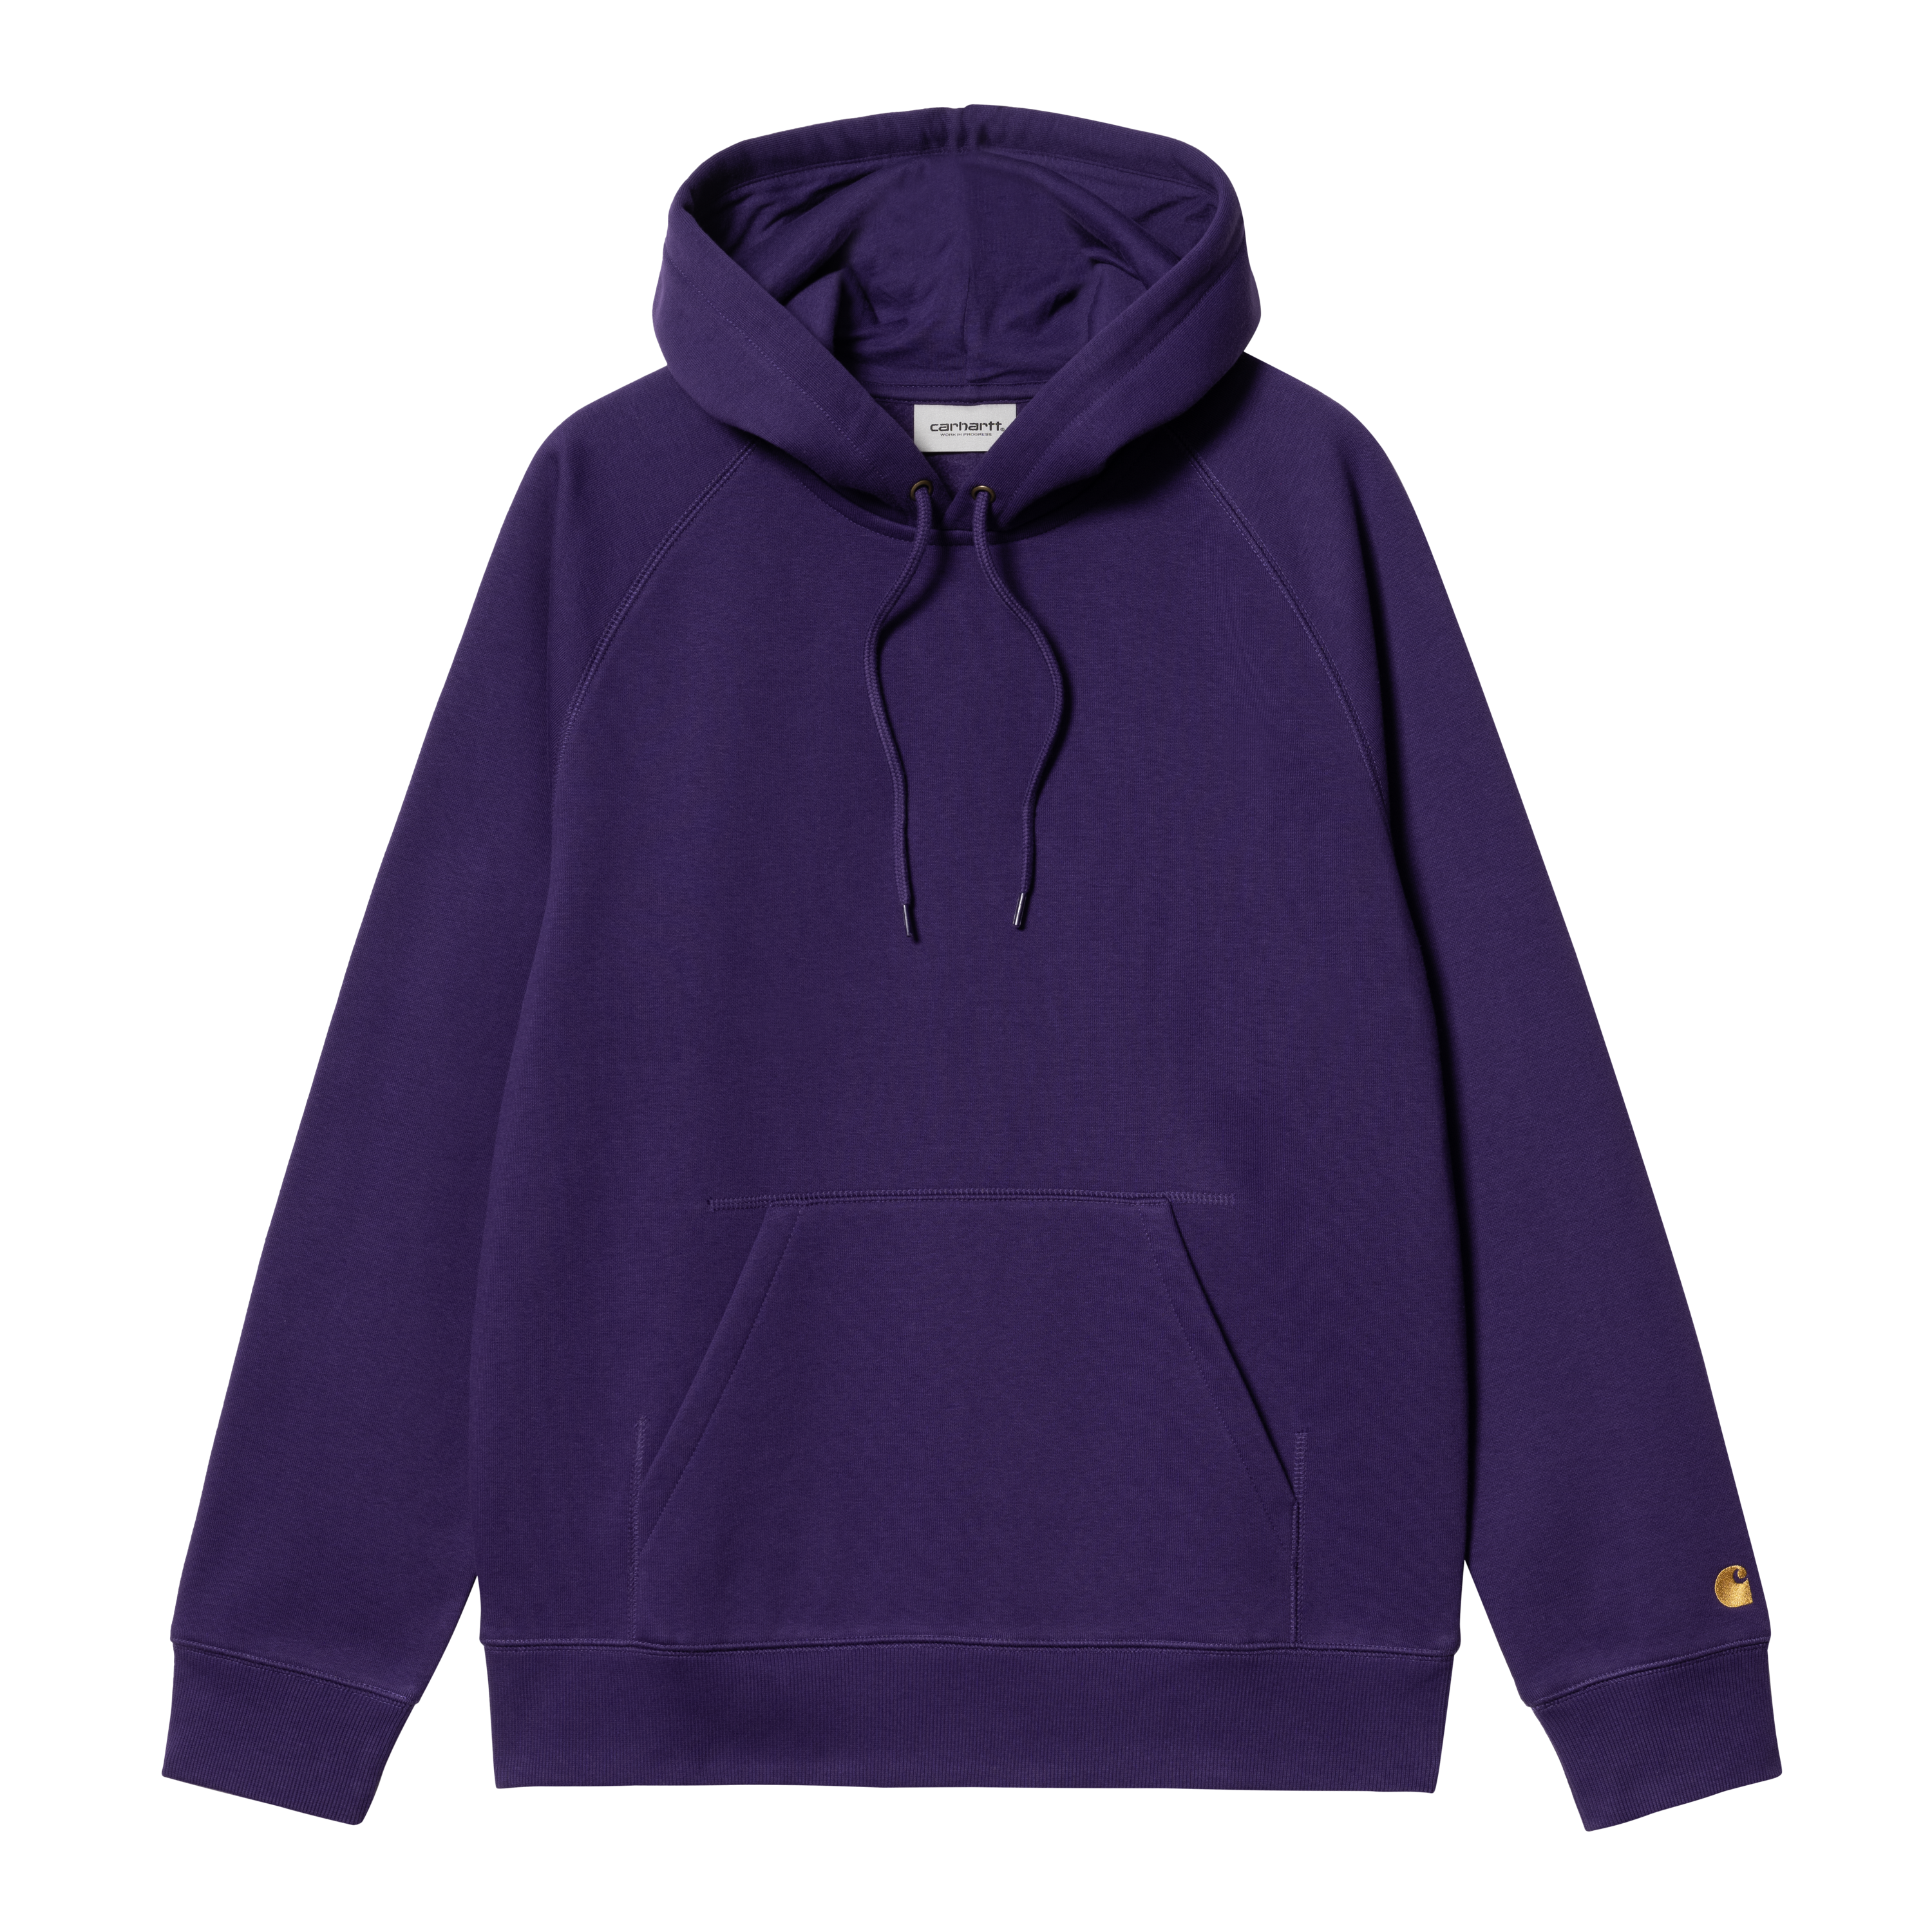 Carhartt WIP - HOODED CHASE SWEAT - Tyrian/Gold